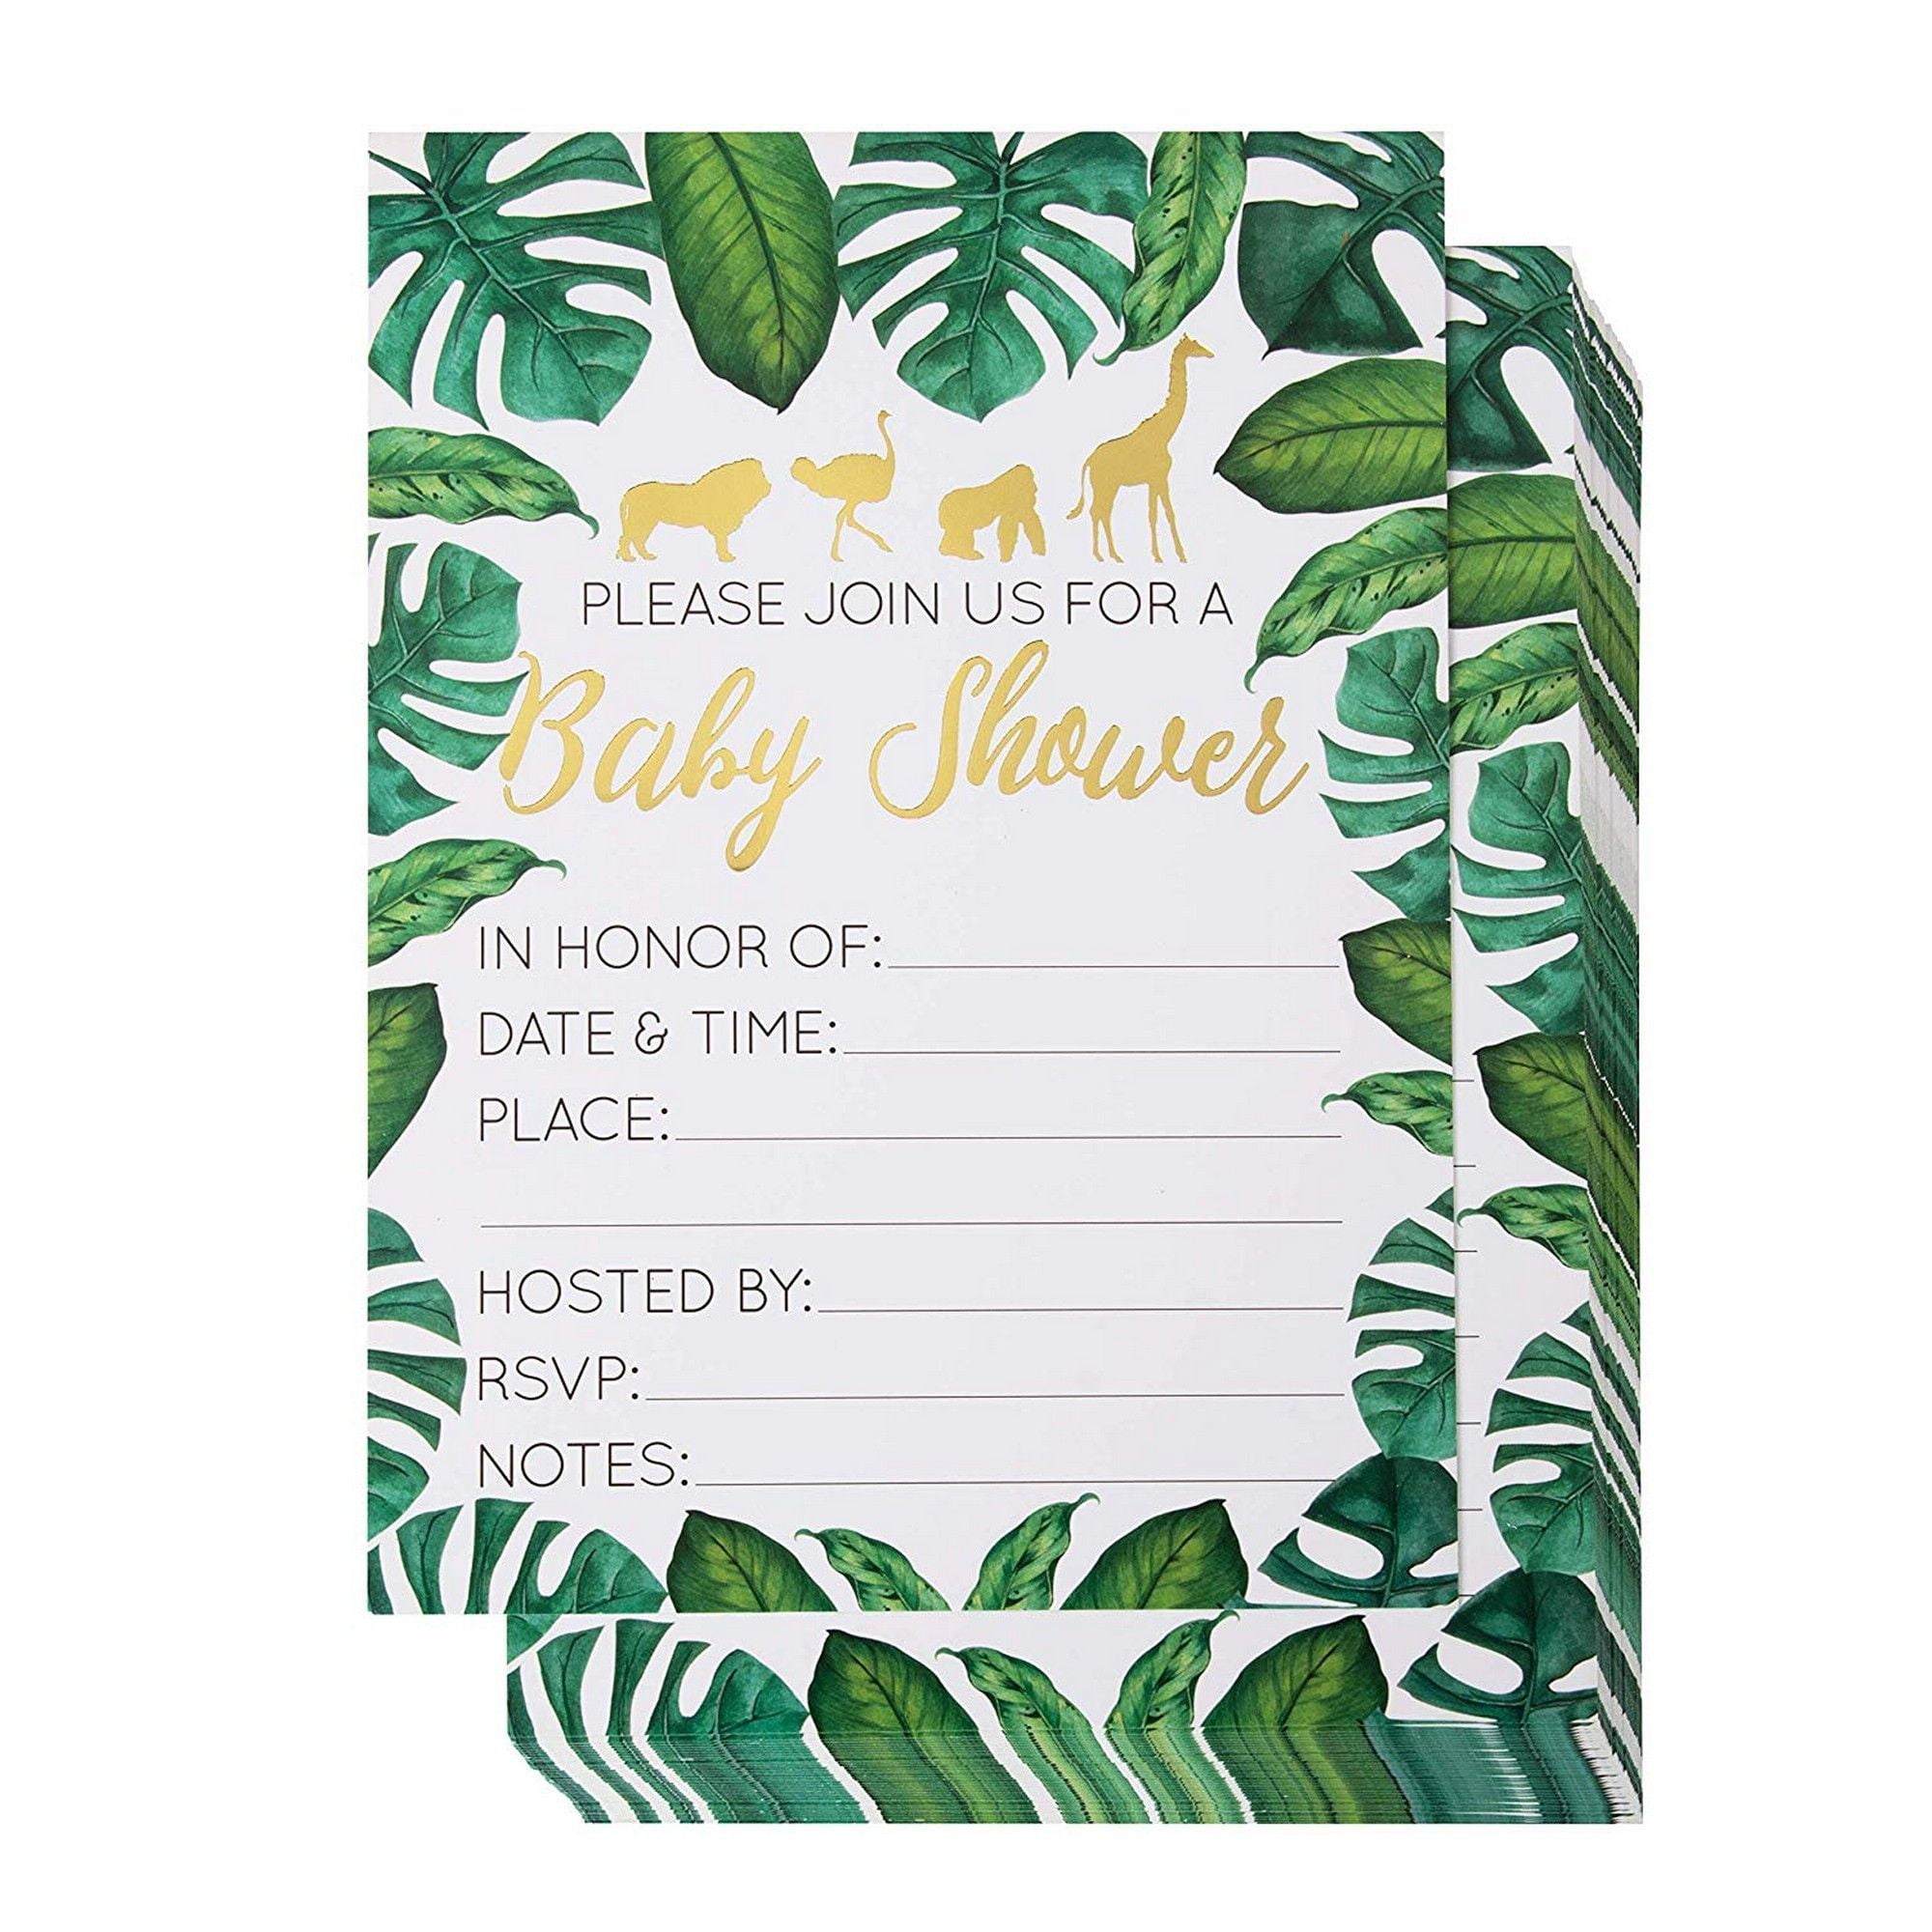 Tropical Safari Animal Theme 36 Fill In Baby Shower Invitations W Envelopes 5 X 7 Inches Green Palm Leaves With Gold Foil Designs Baby Shower Invites Party Supplies For Baby Showers Or Parties